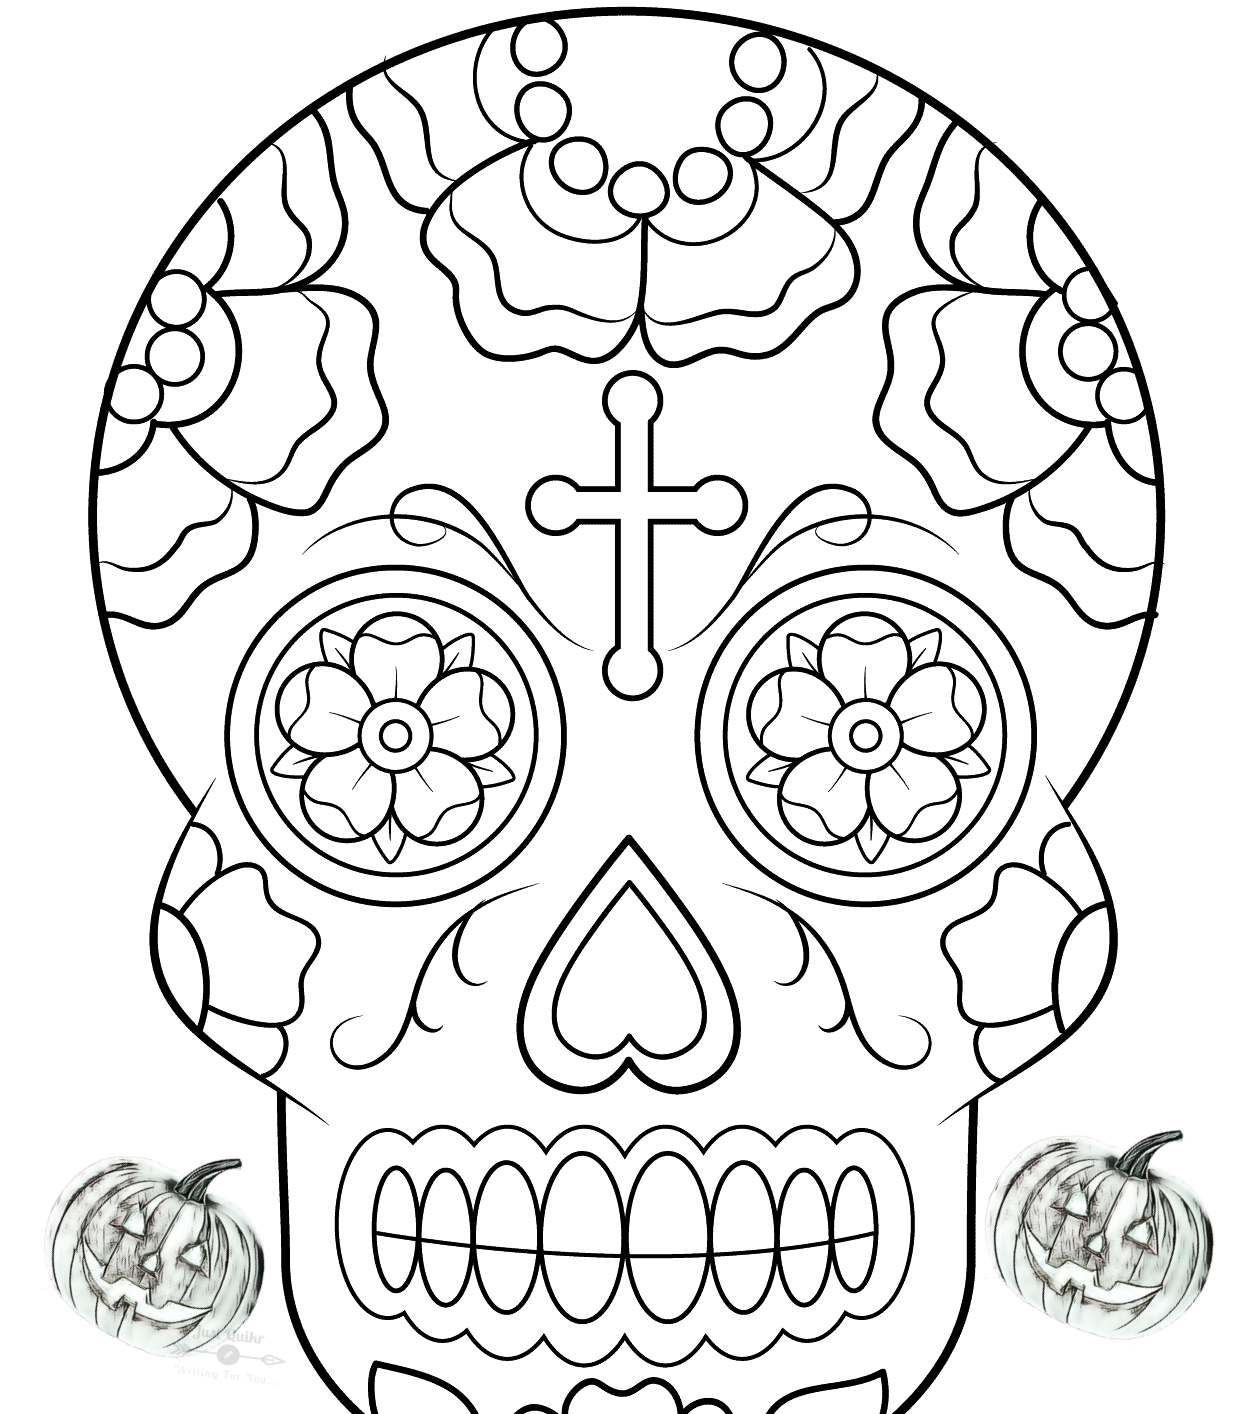 Halloween Day Coloring Pages Drawings for Sugarskull